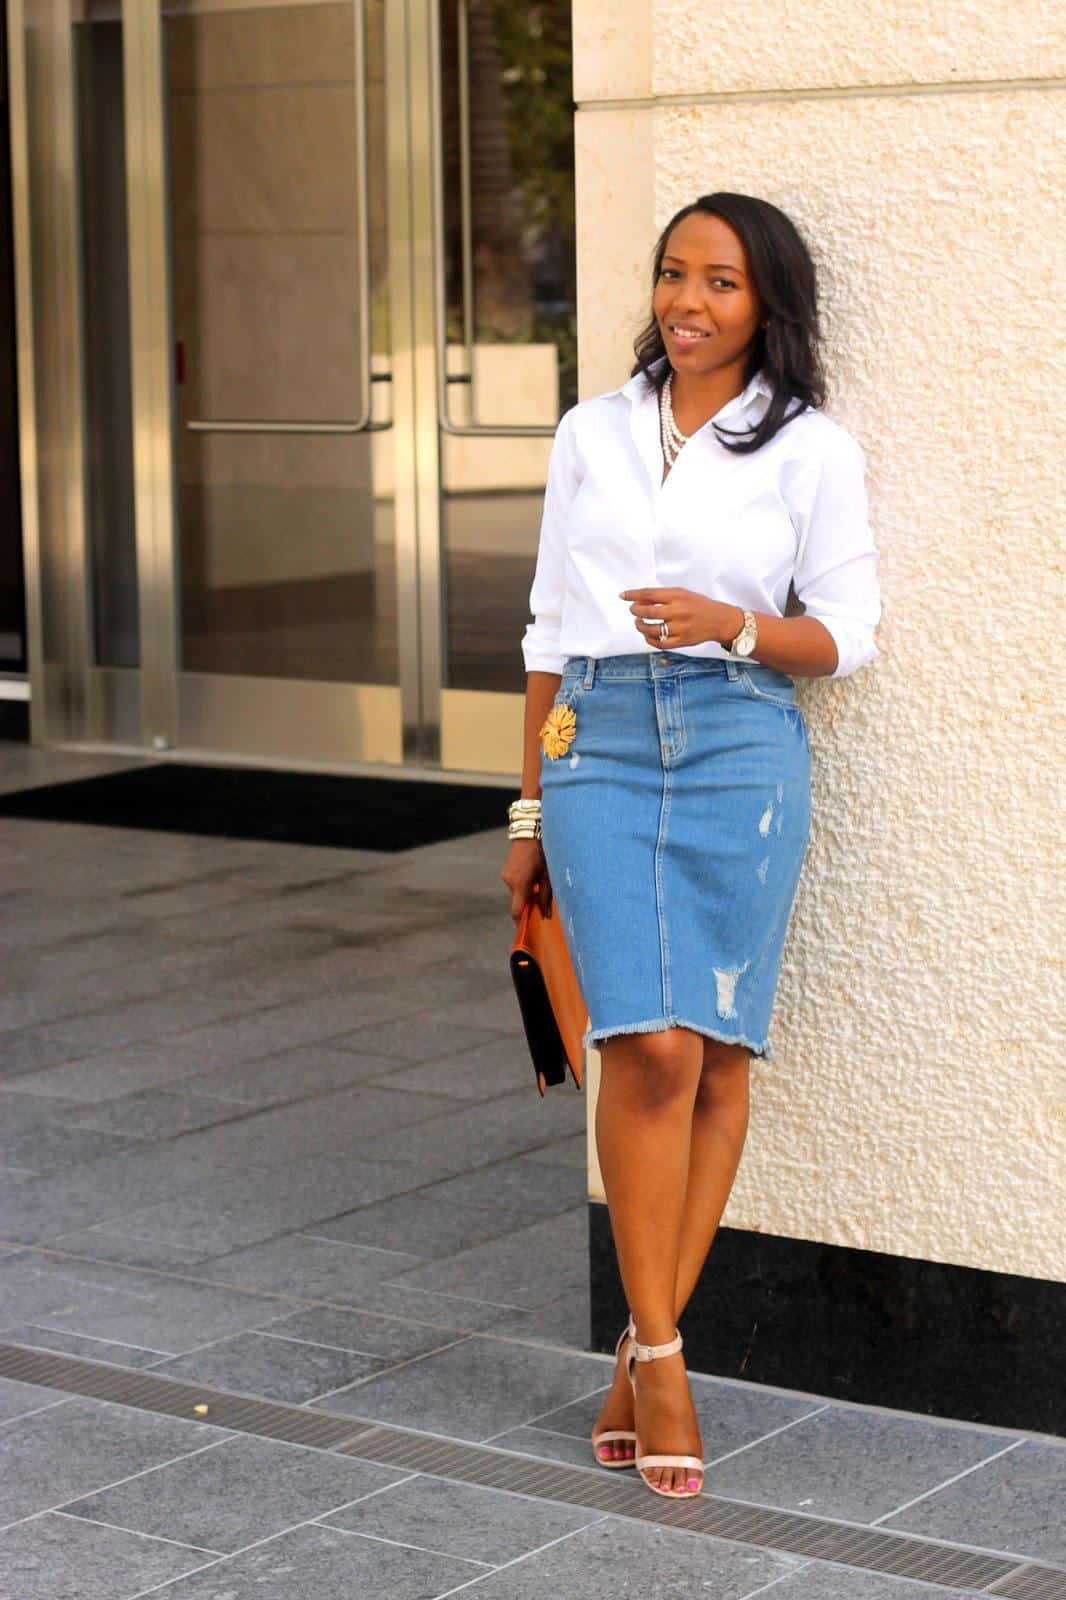 Best Work Outfits for African Women - 25 Professional Looks